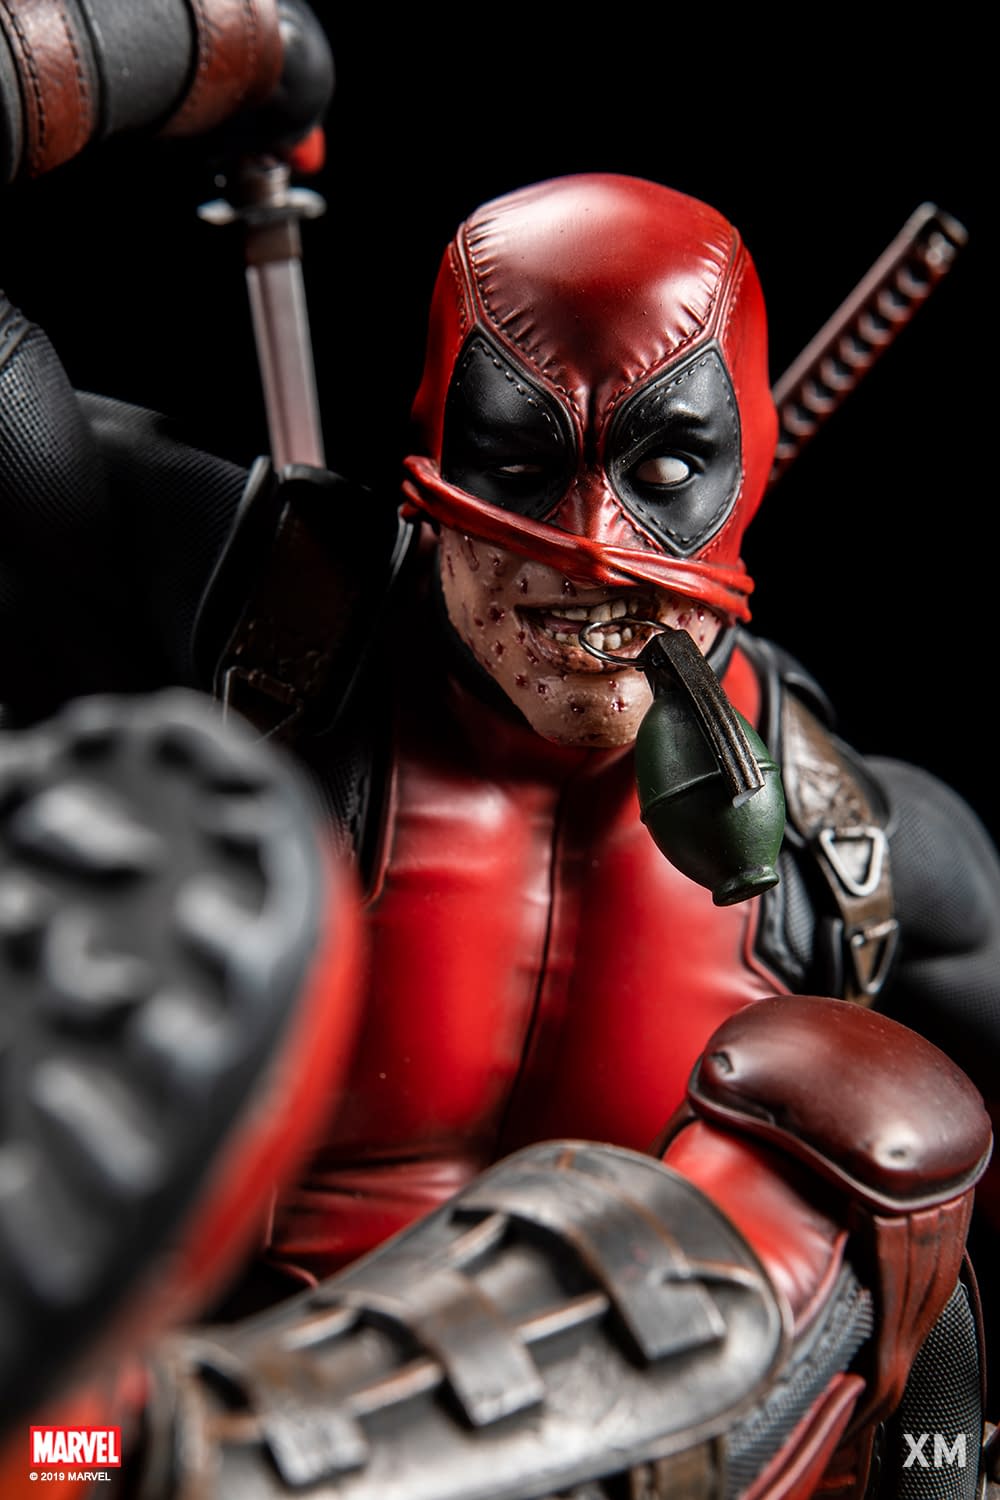 Deadpool Gets a Magically Hand-Crafted Statue from XM Studios